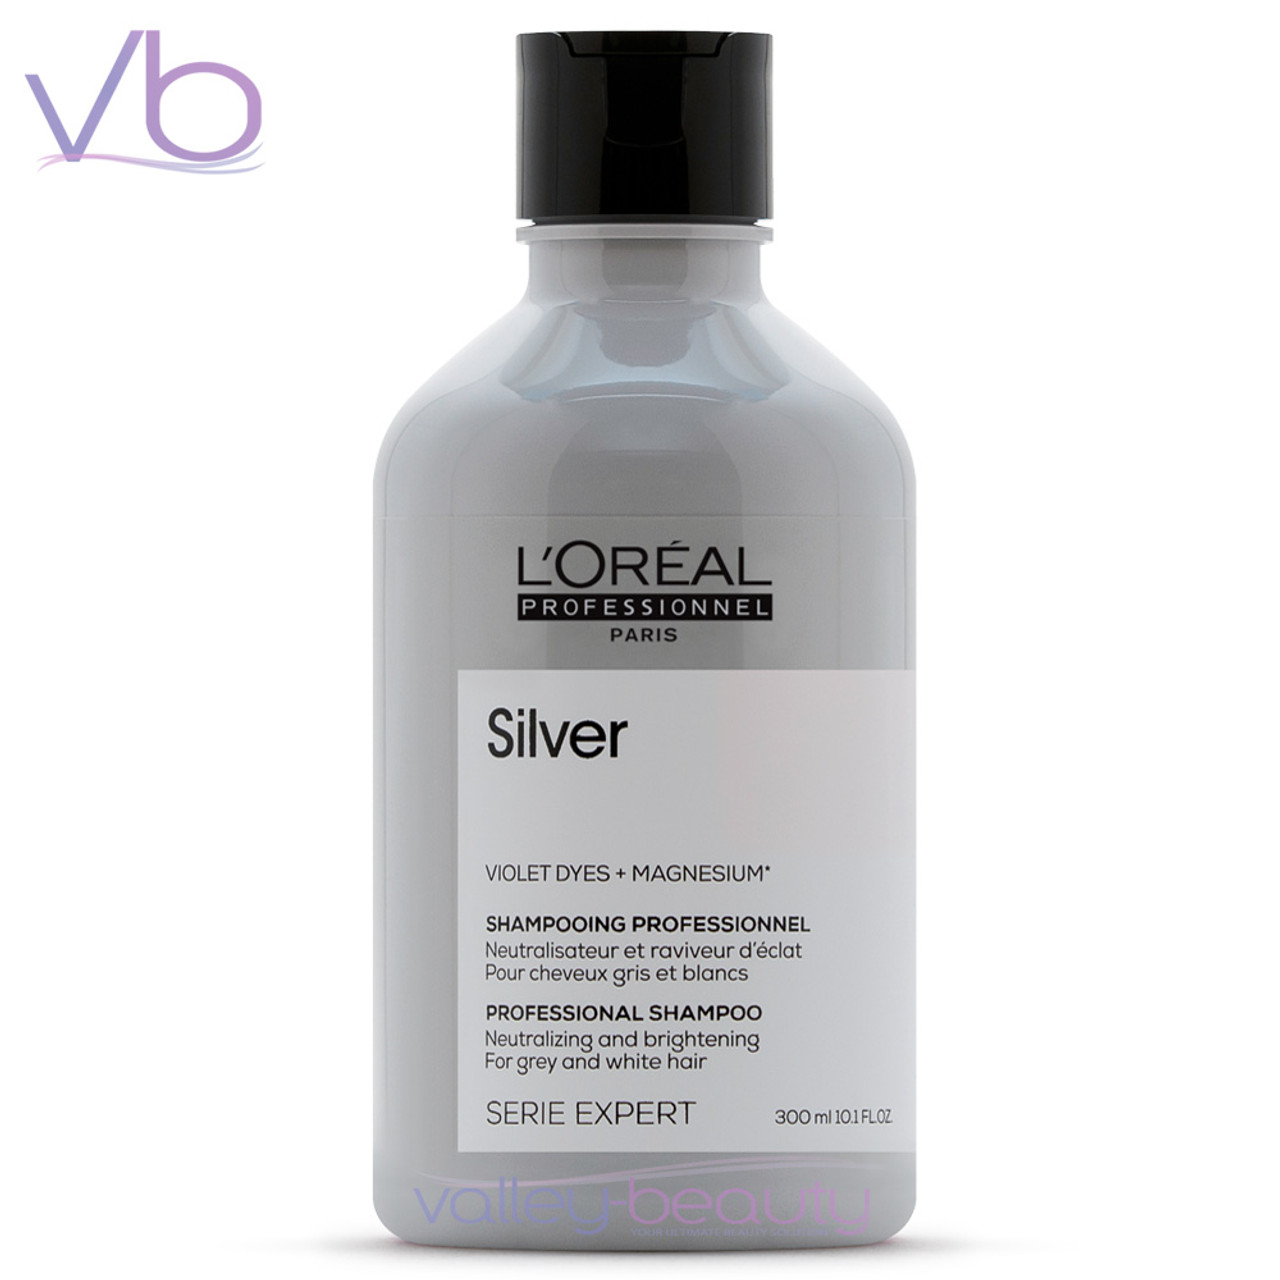 L'Oreal Silver Shampoo | and Brightening for Grey and White Hair